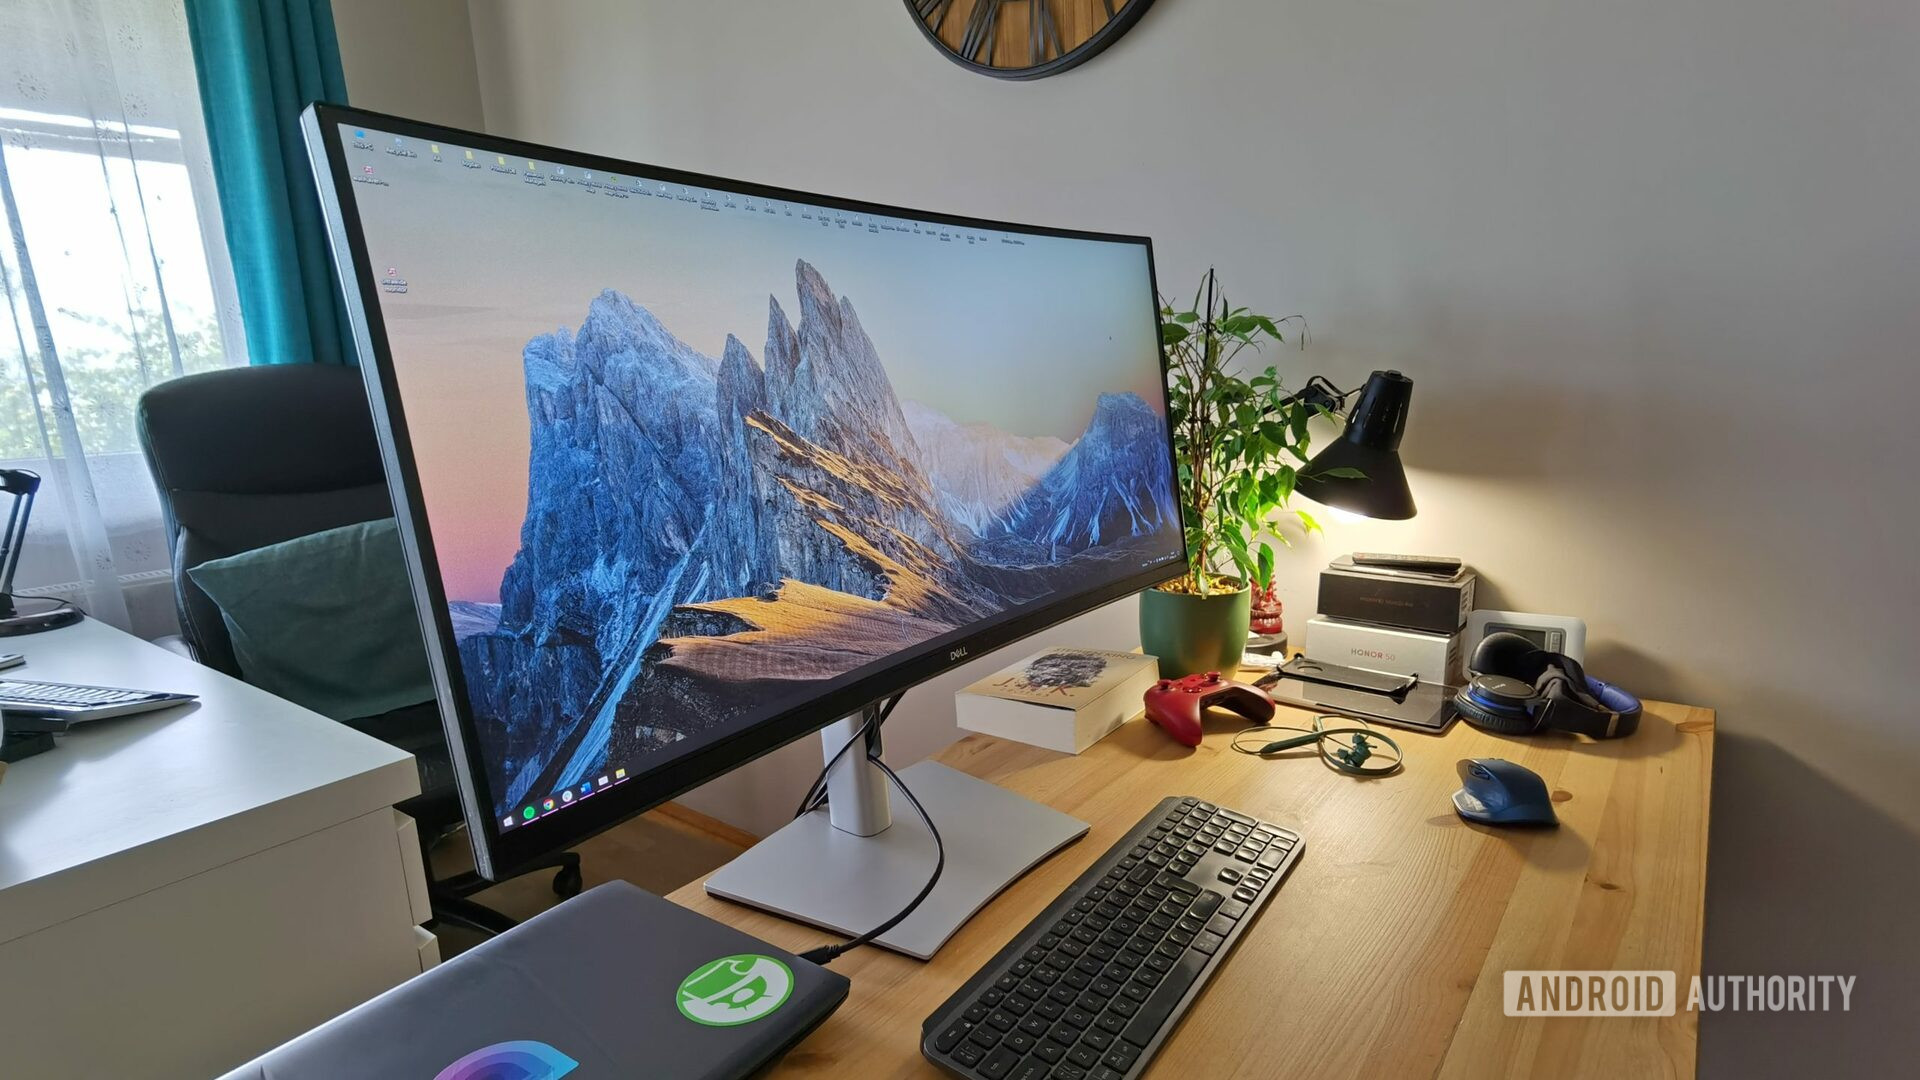 Dell P3421W ultrawide monitor on a desk with keyboard and other accessories.